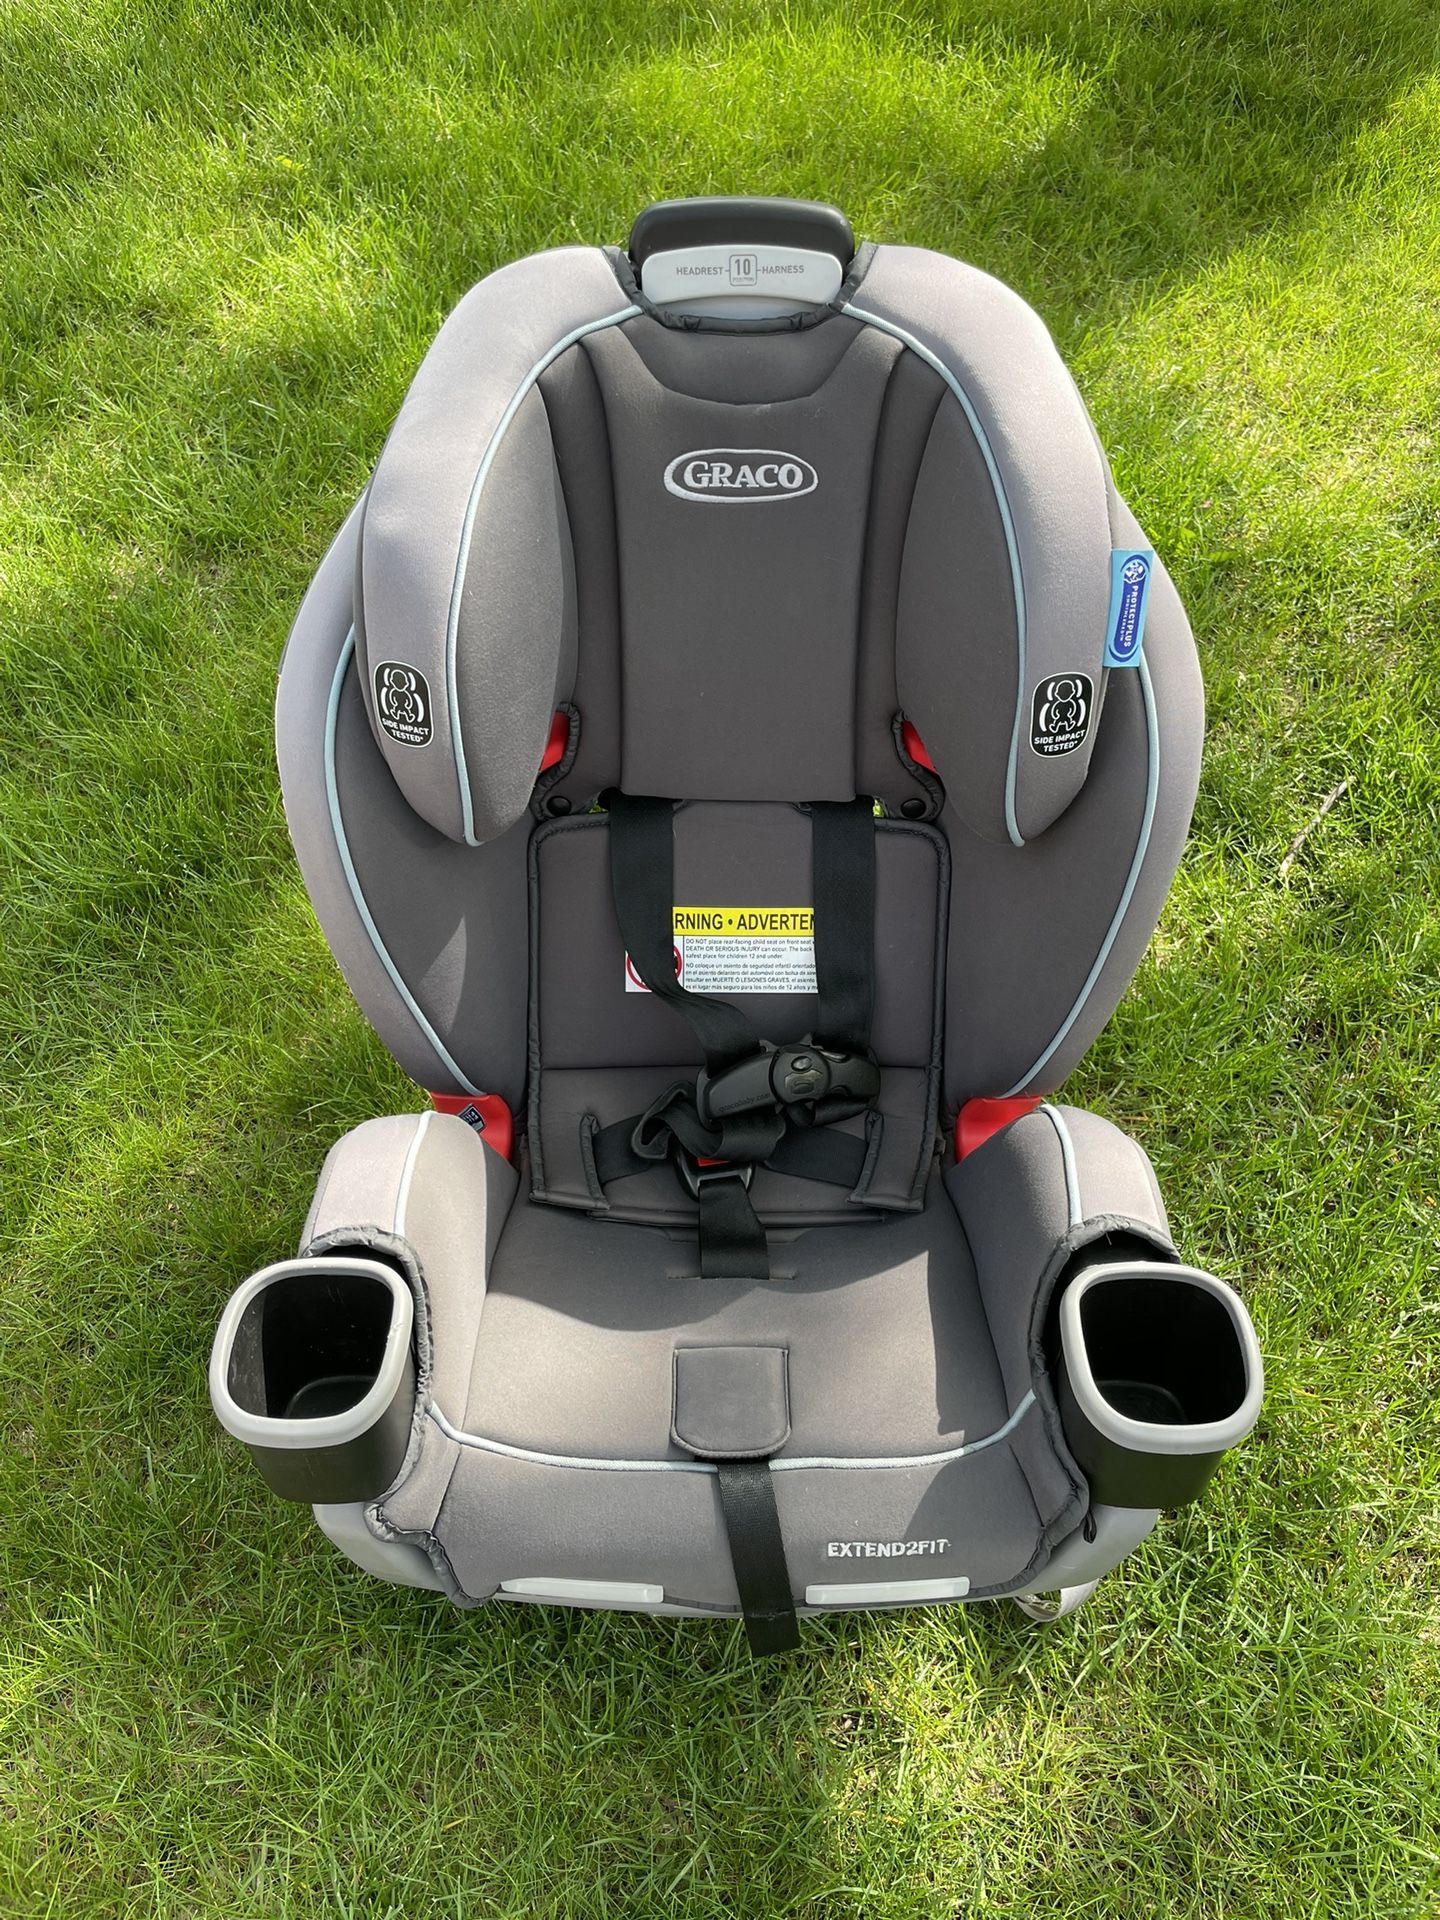 Craco Extend2fit 3-in-1 Car Seat Boy Or Girl